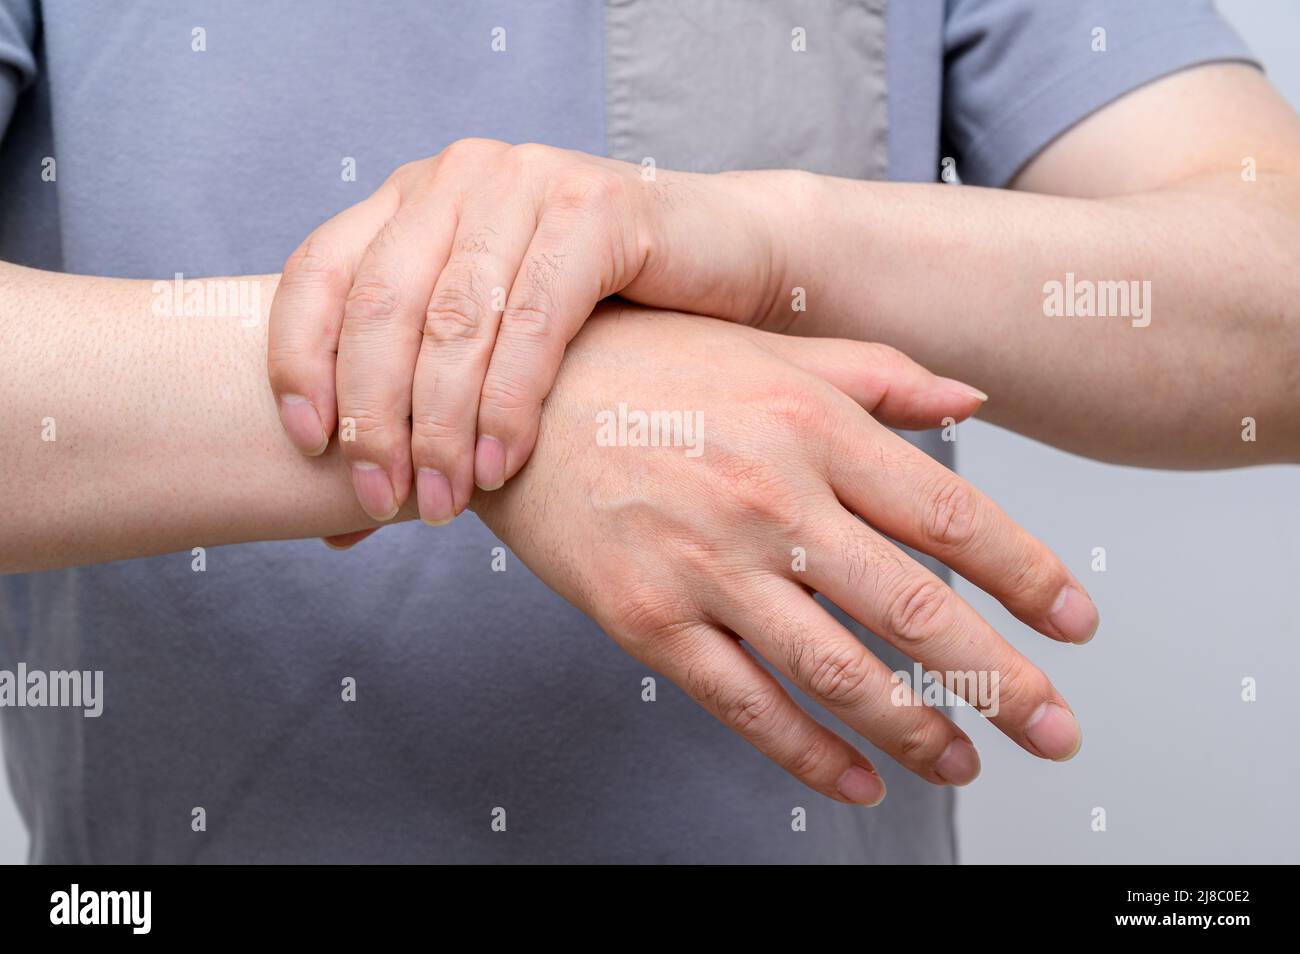 A man wrapped around his wrist because of wrist pain. Causes of rheumatoid arthritis, carpal tunnel syndrome, gout. Health care and medical concept. Stock Photo